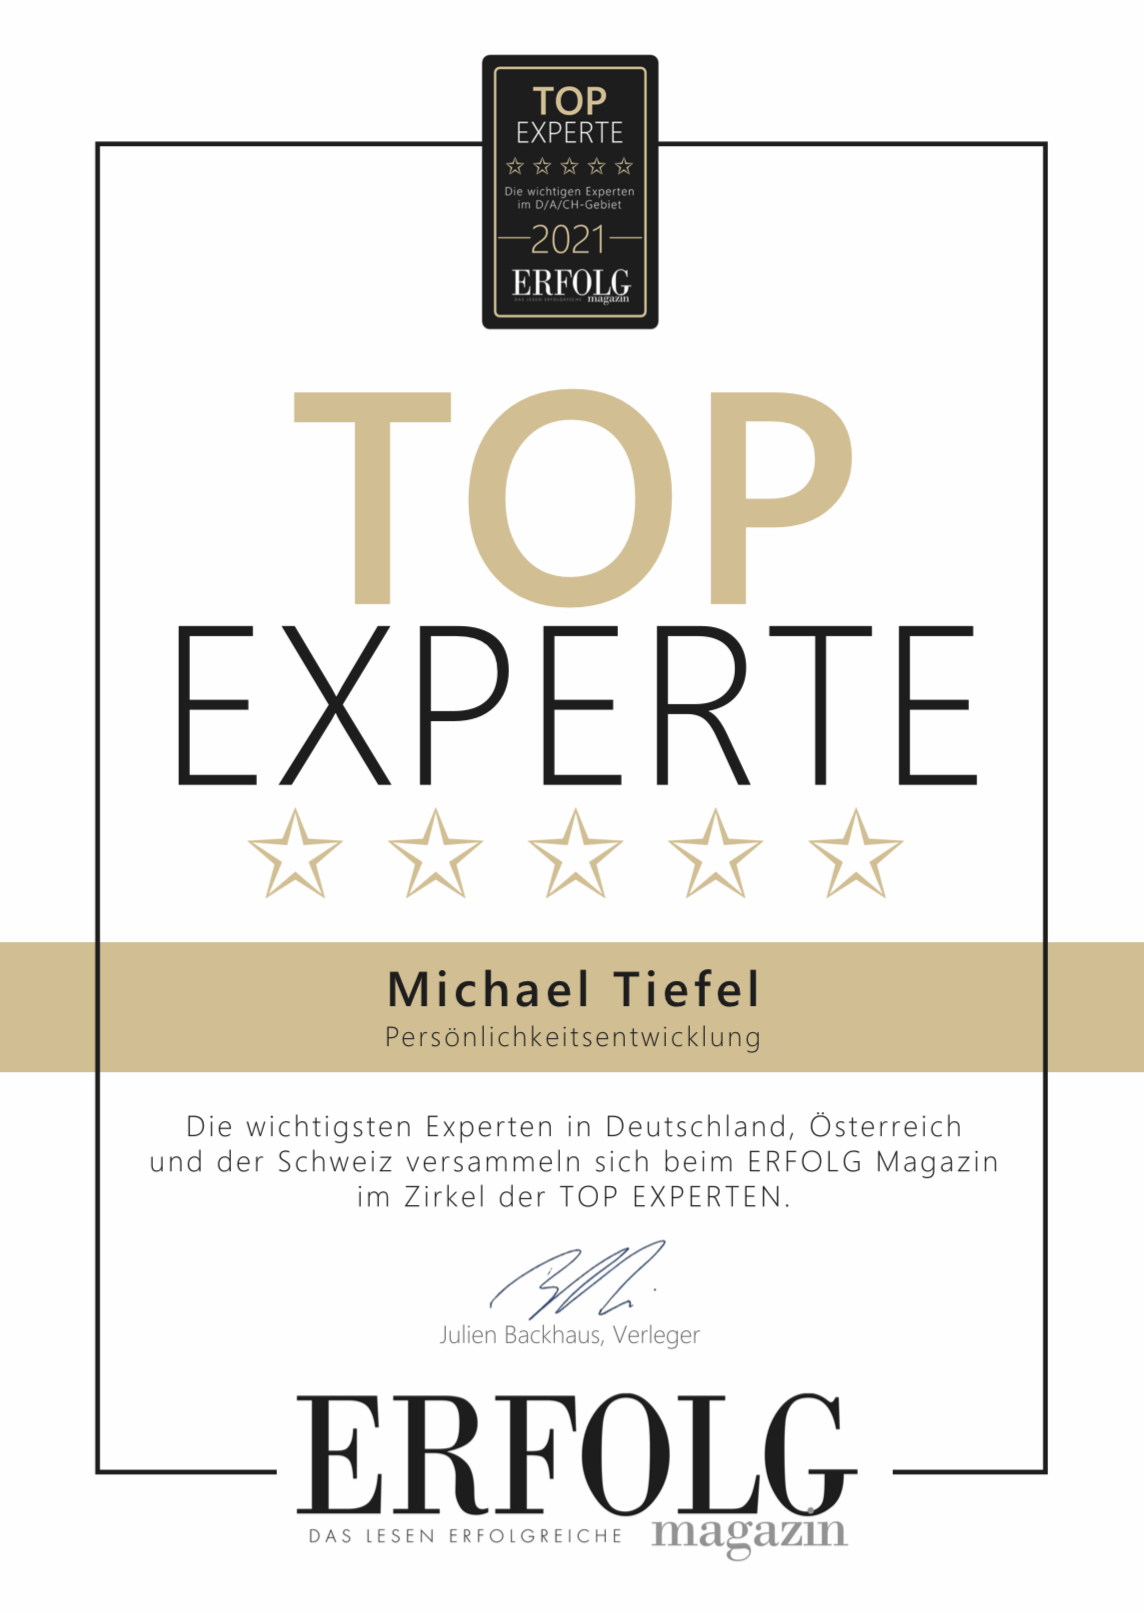 Expert Marketplace - Michael Tiefel - Impressions 0